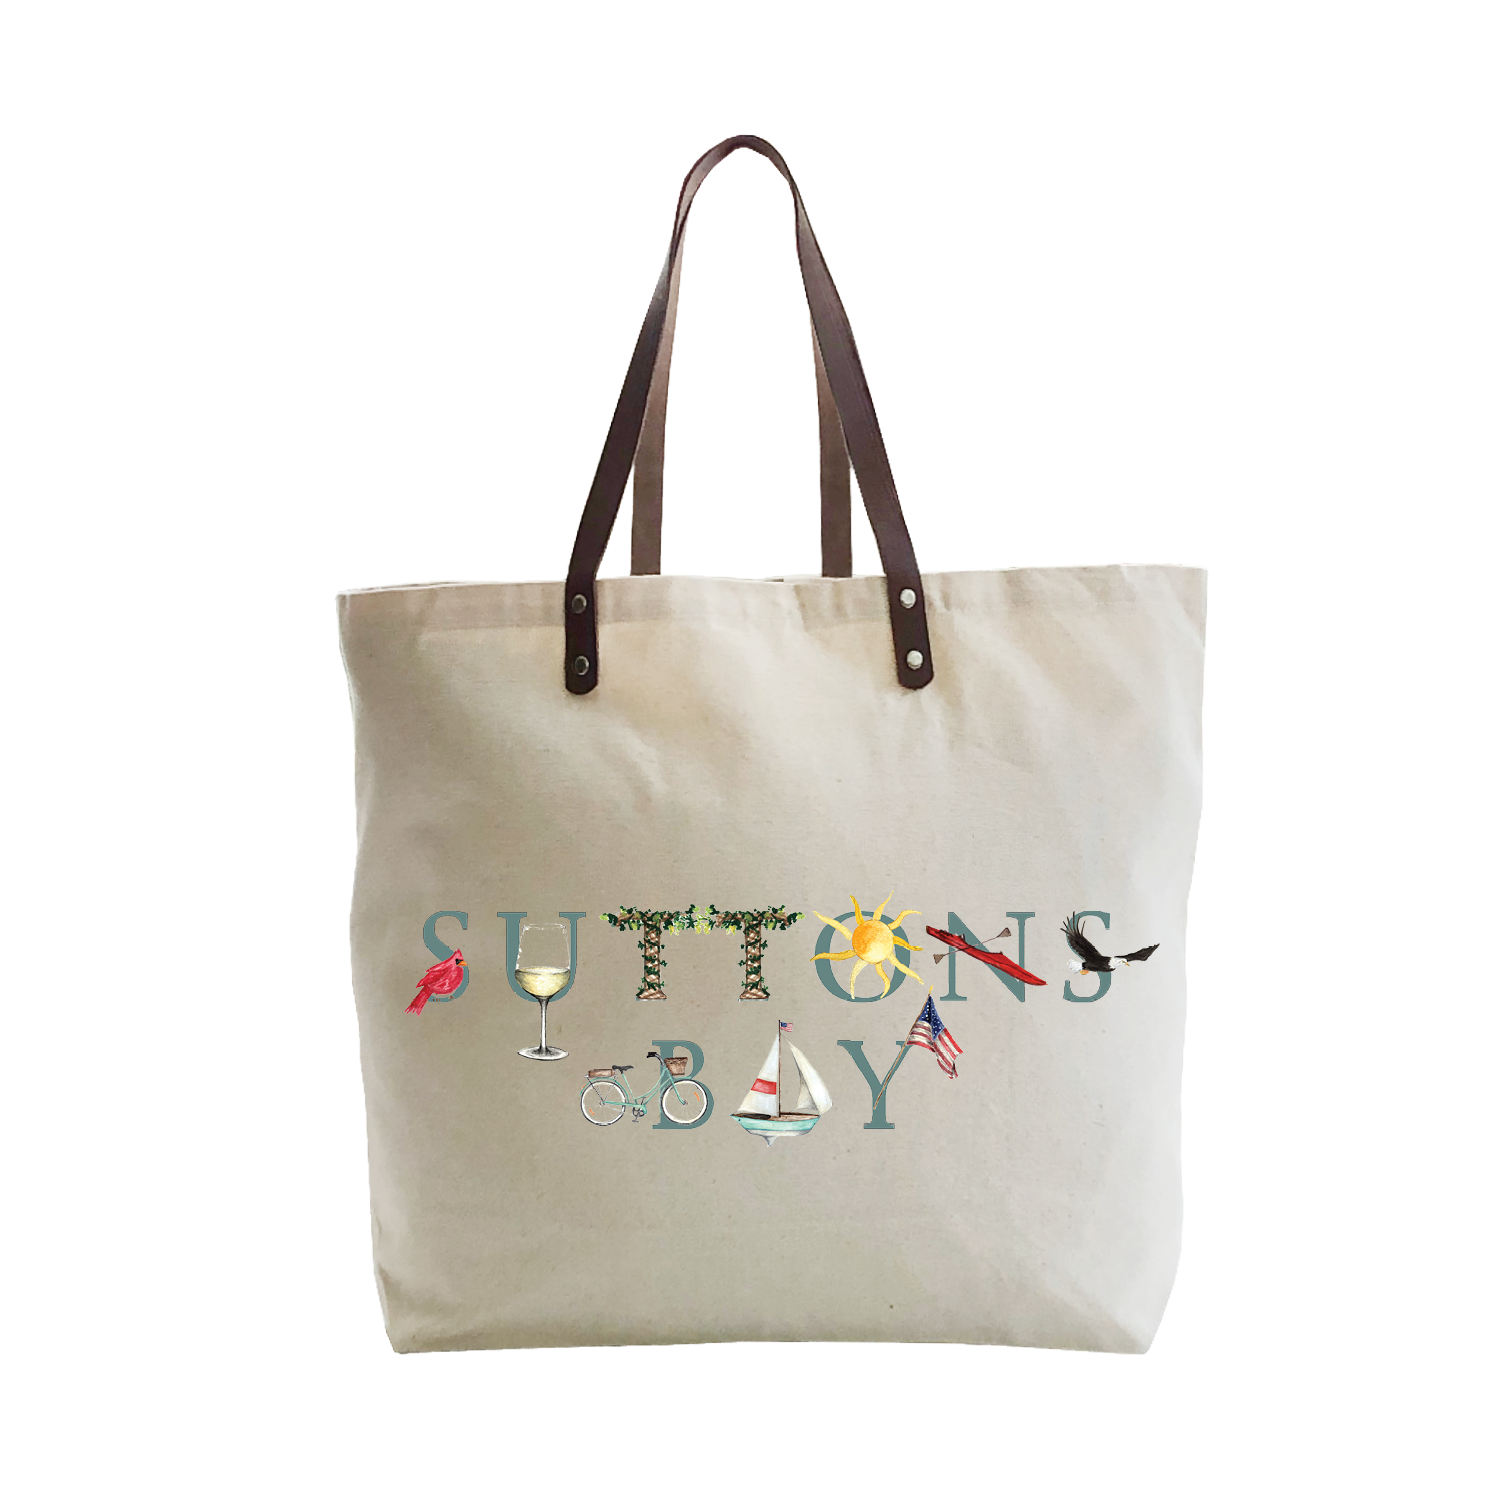 suttons bay large tote